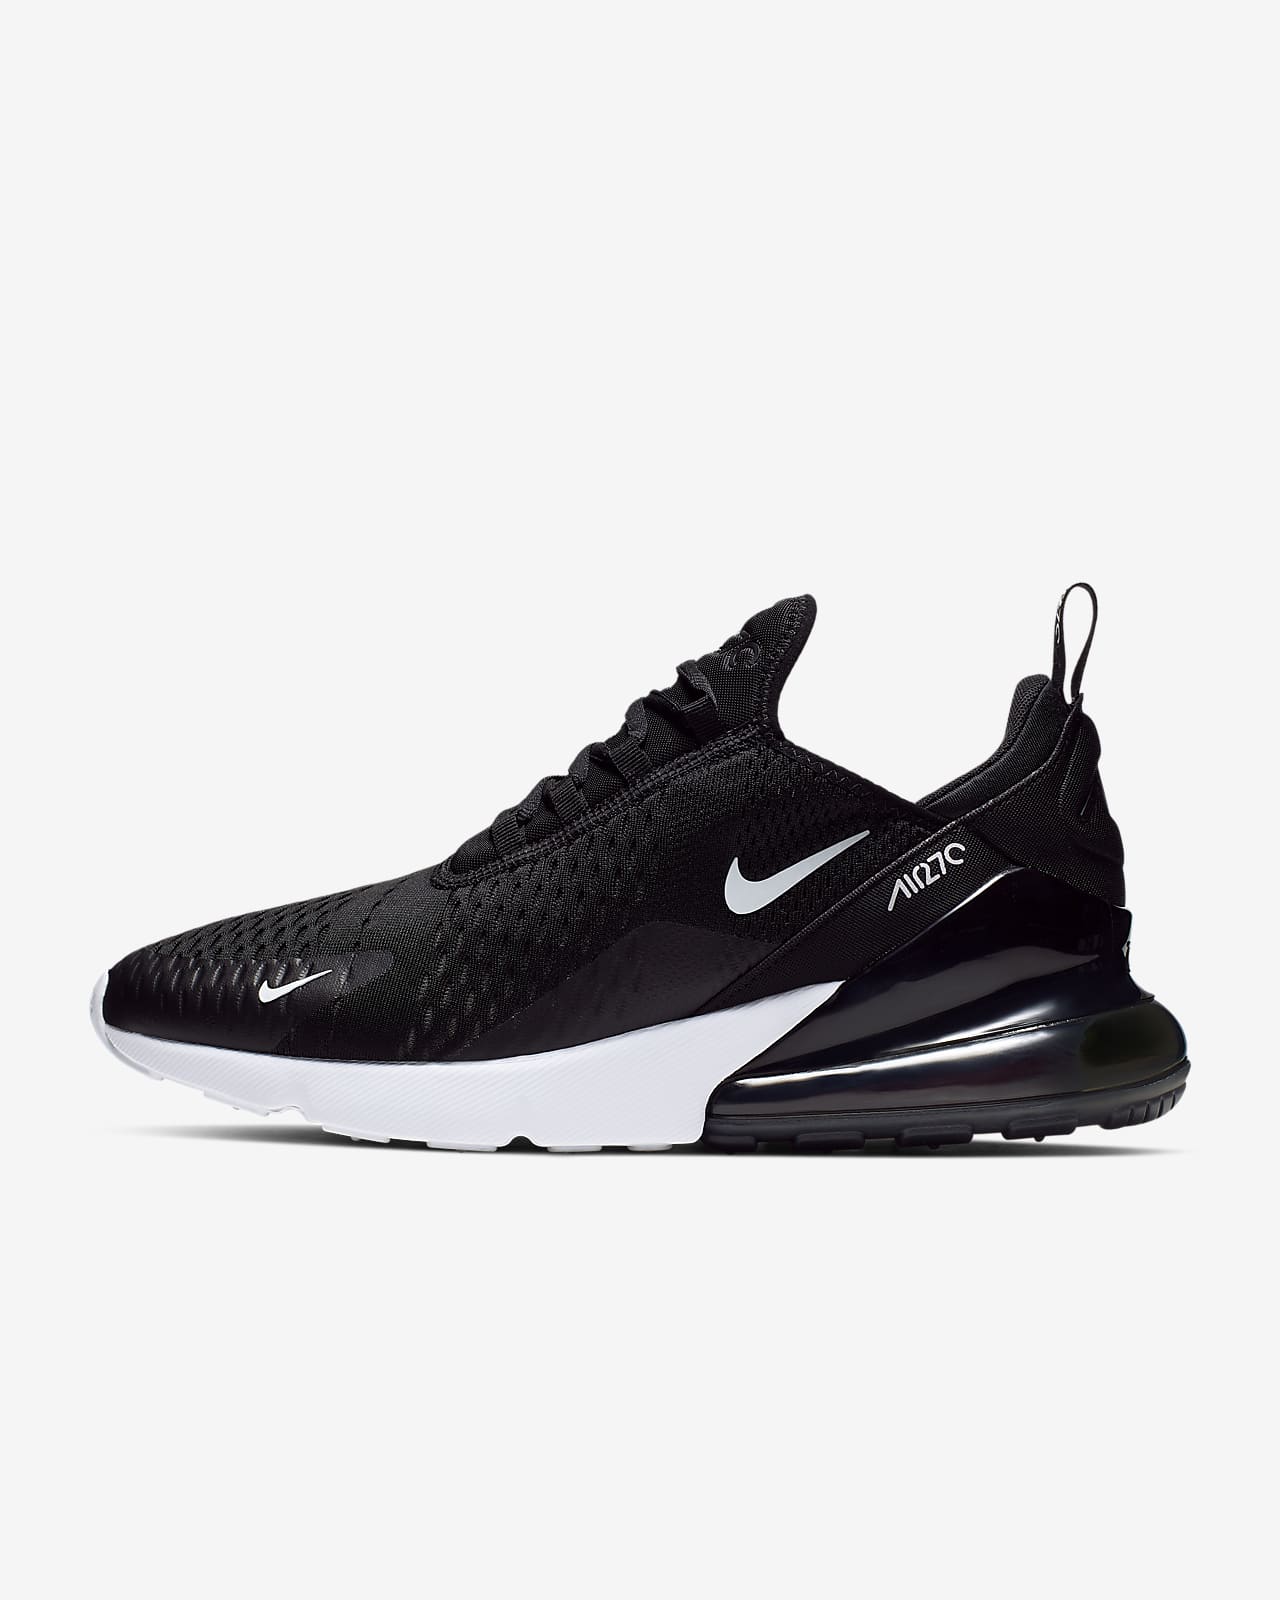 270 nike shoes black and white